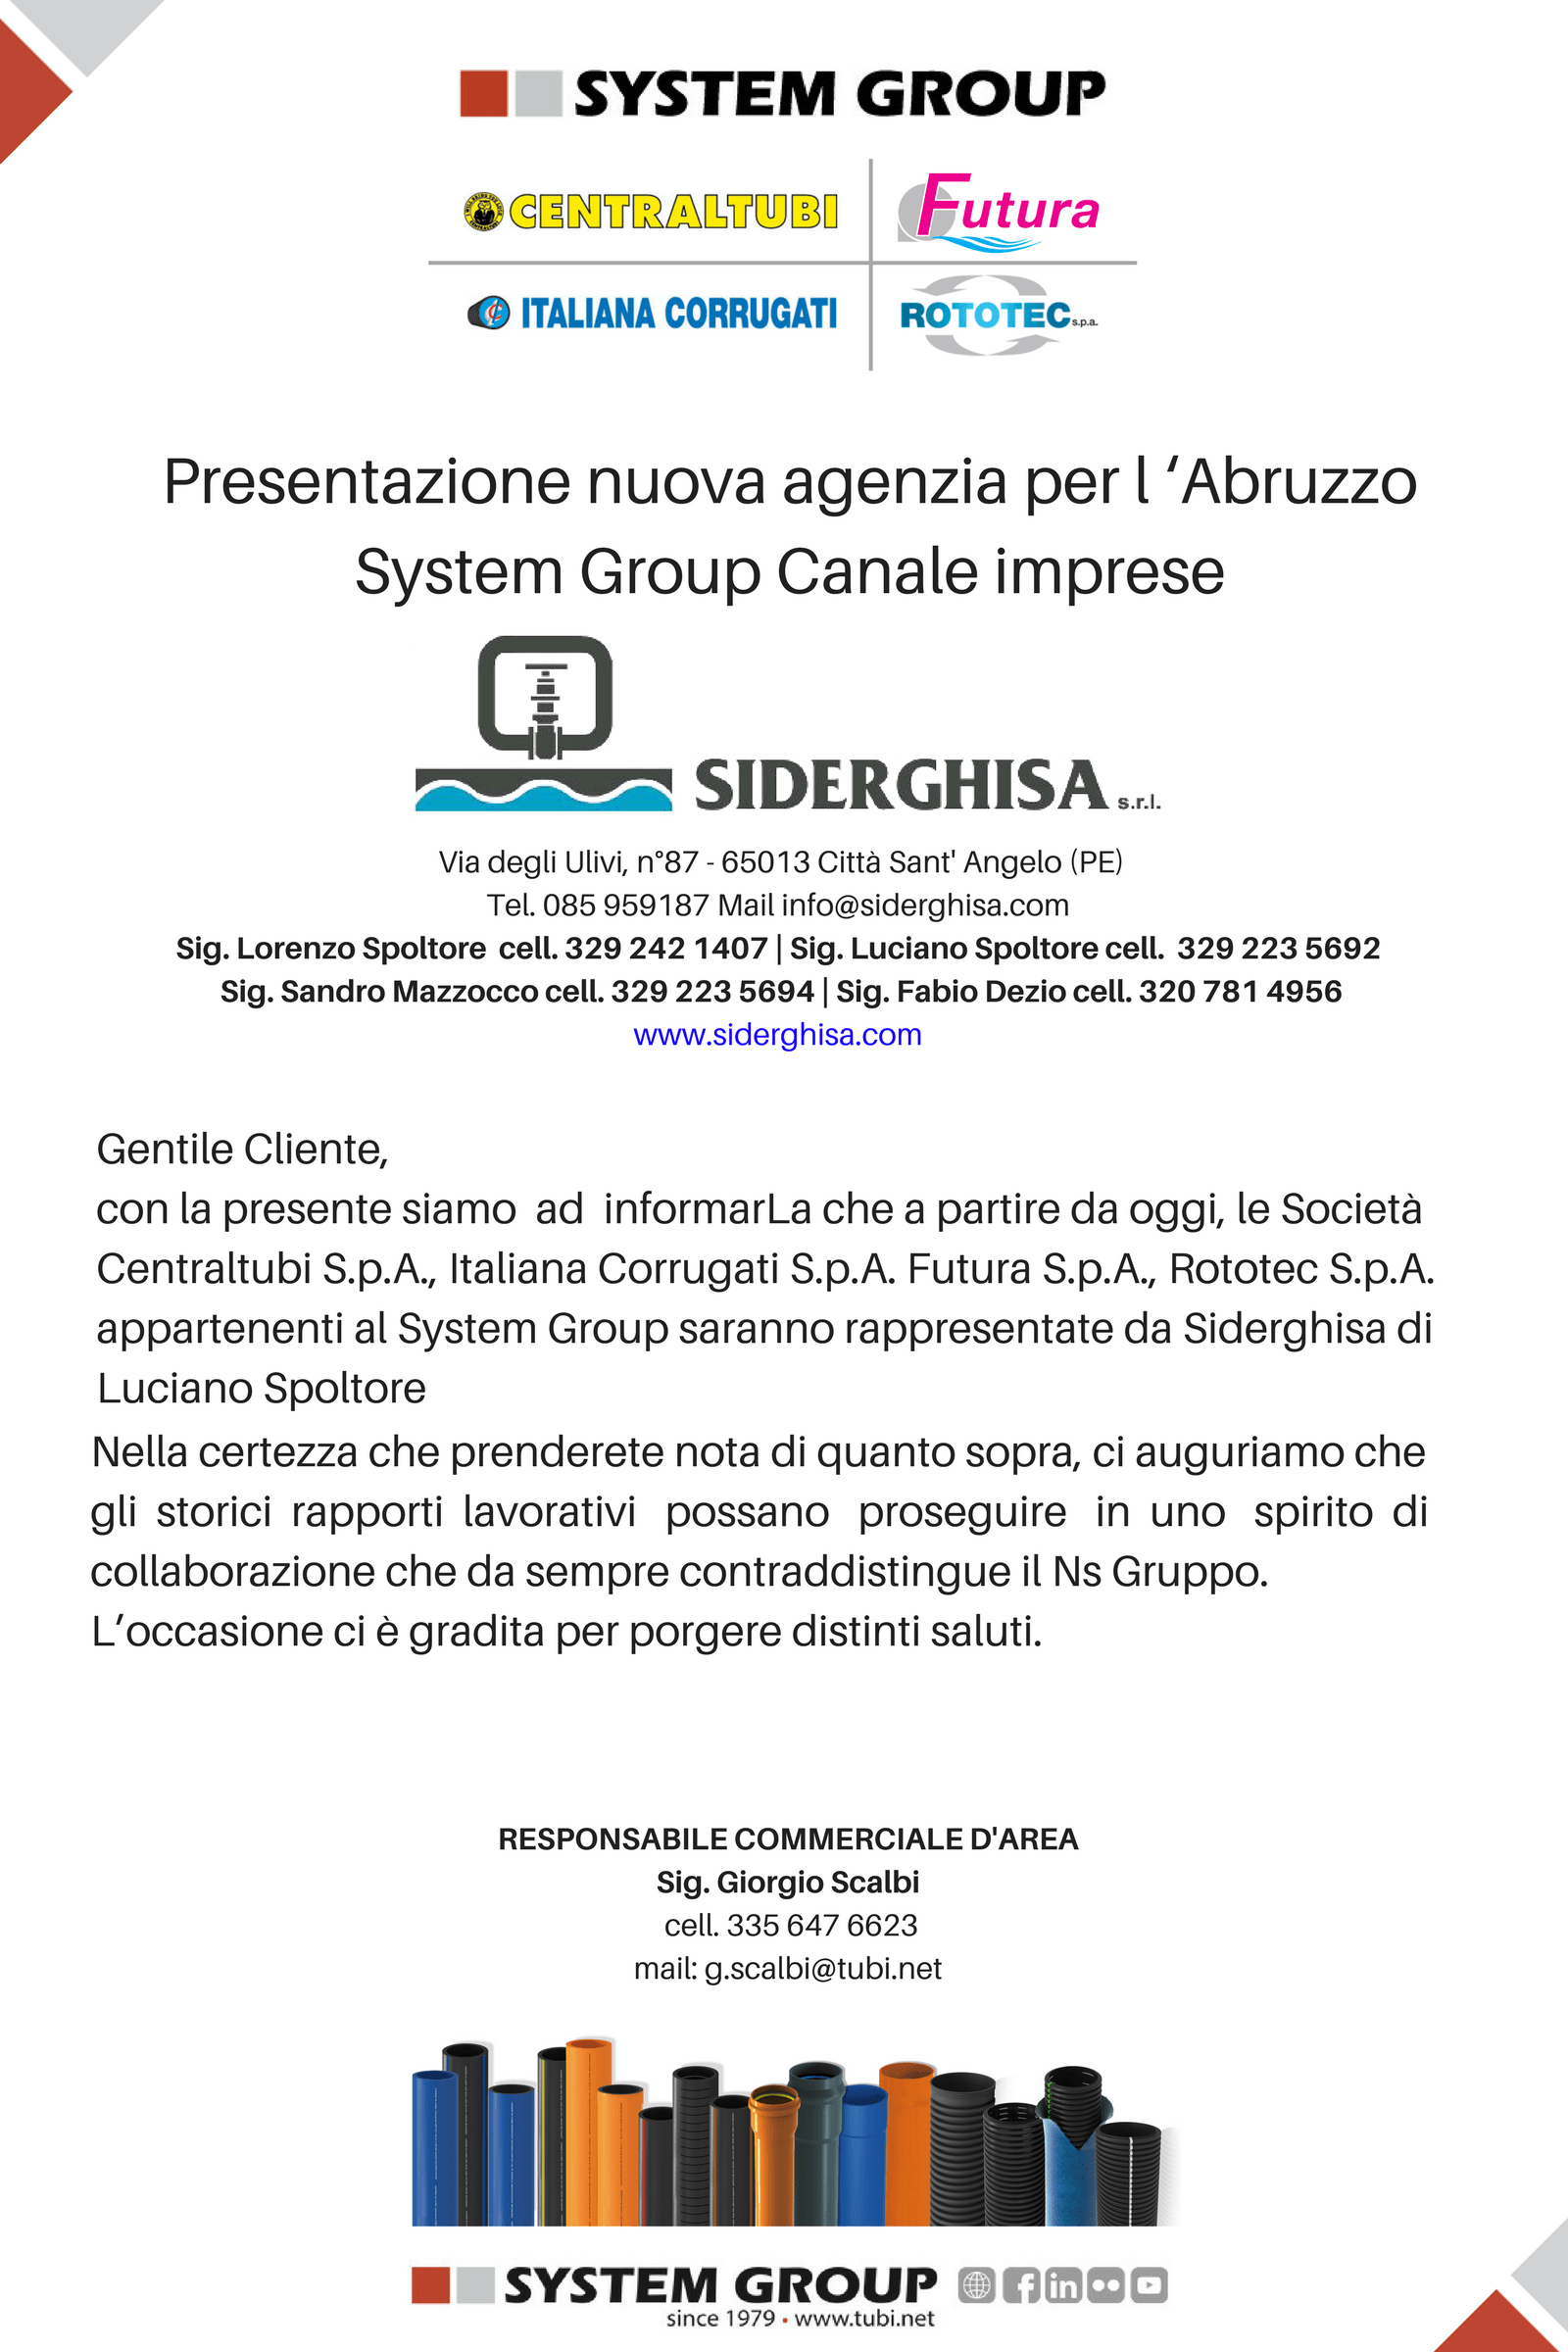 Systemgroup Presentation new agency for Abruzzo